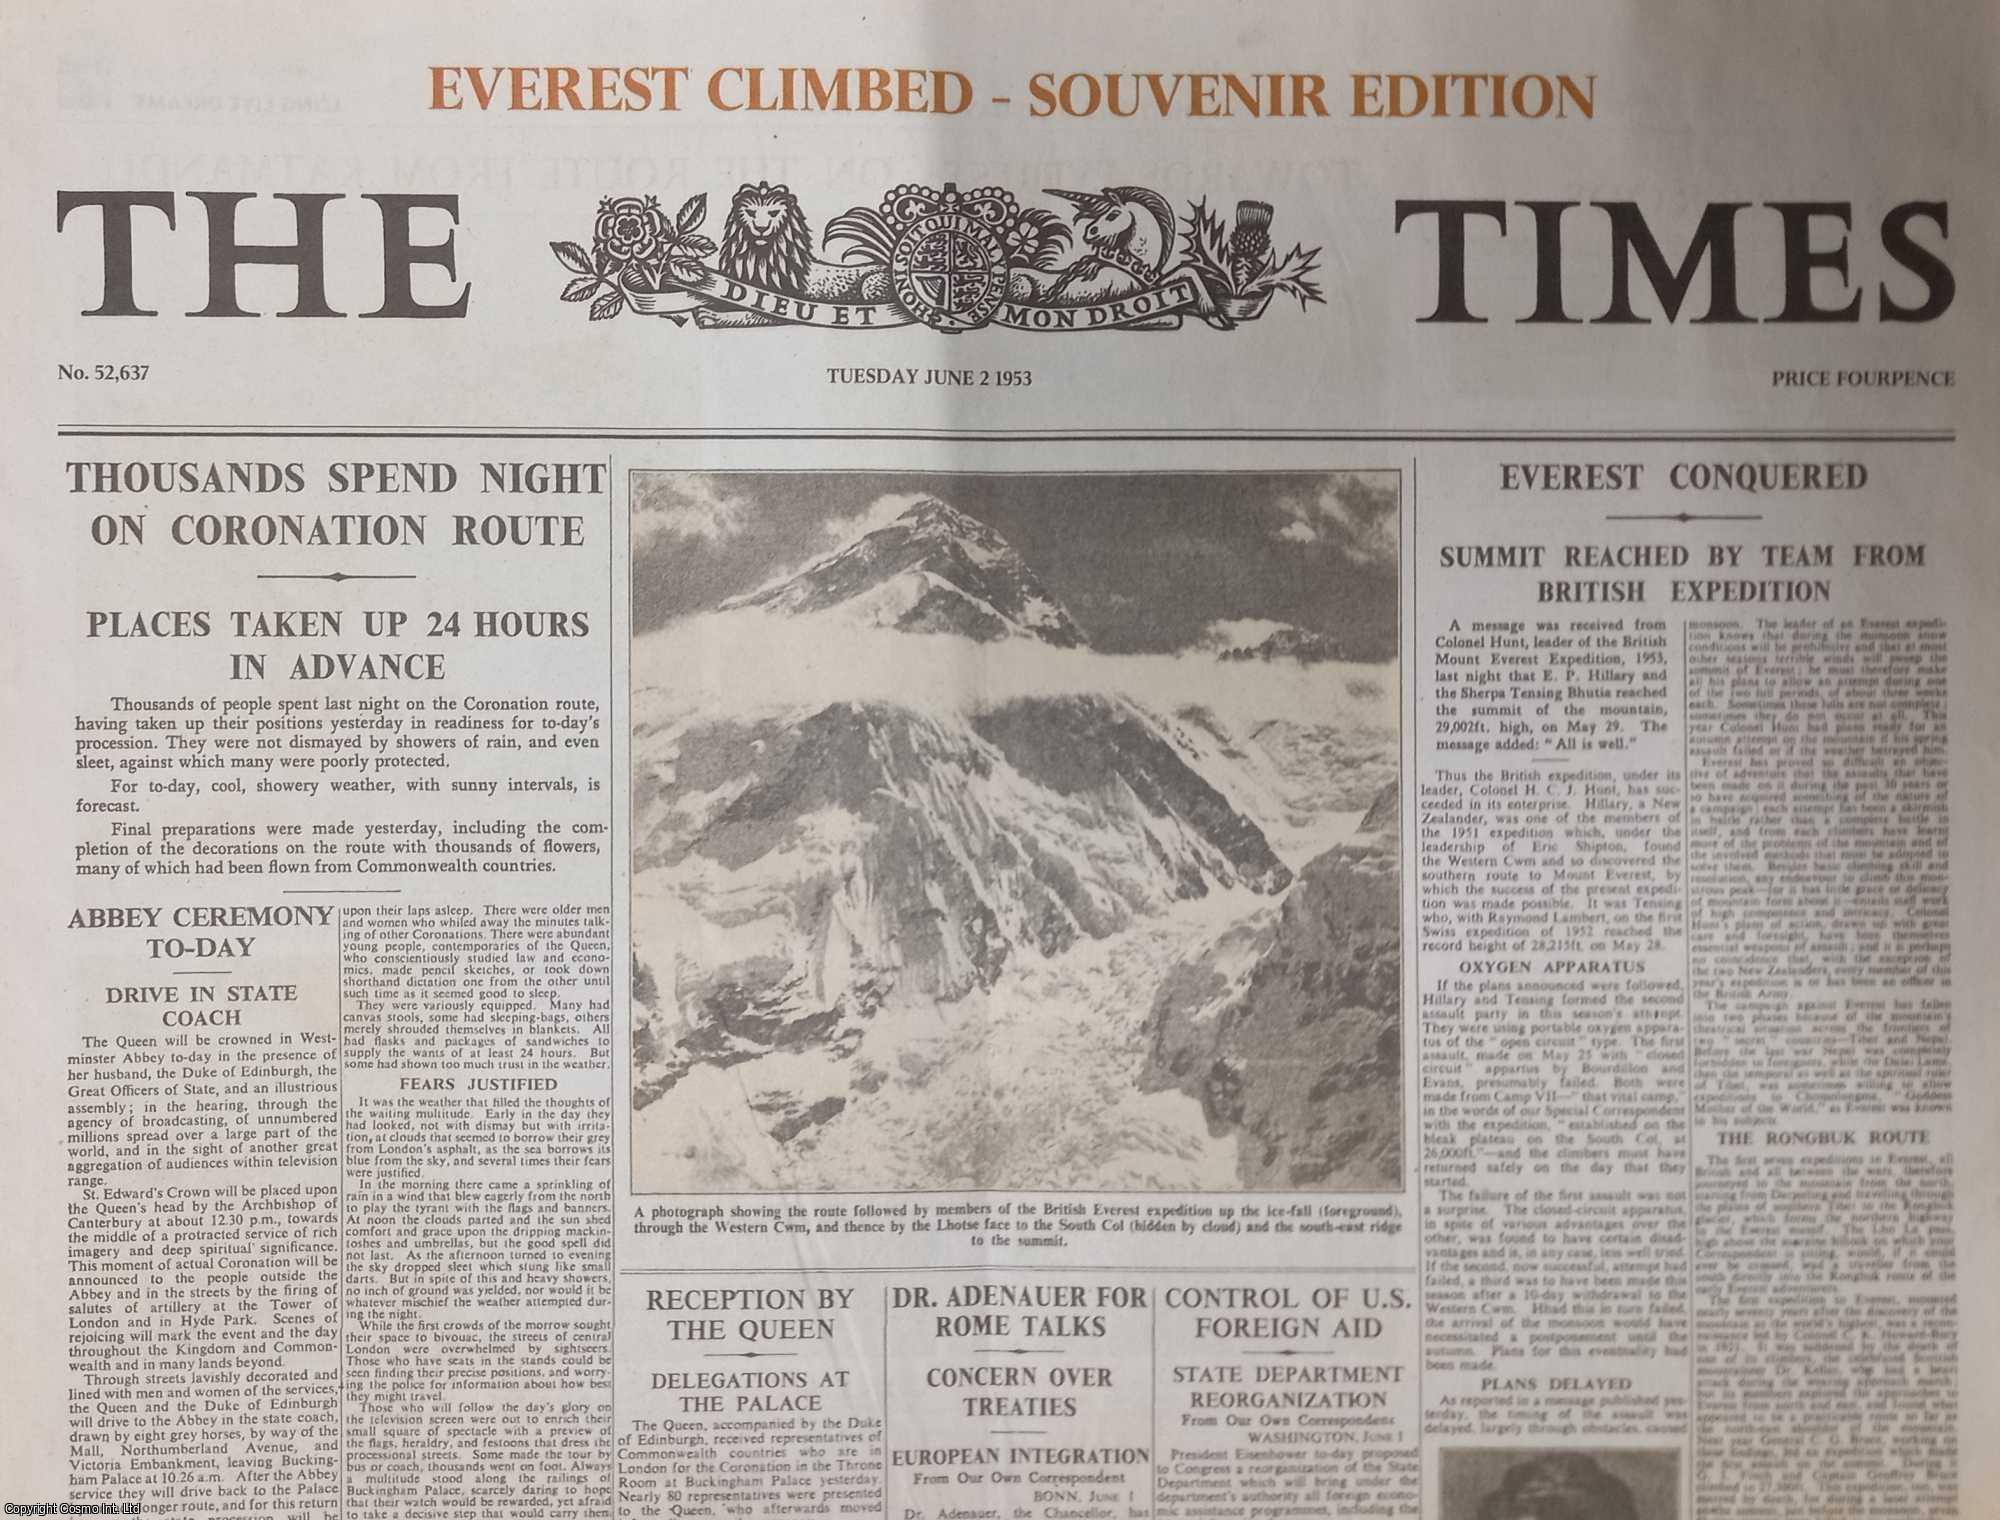 EVEREST - Everest Climbed, Souvenir Edition. The Times, Tuesday June 2, 1953. A modern reprint of the entire newspaper.